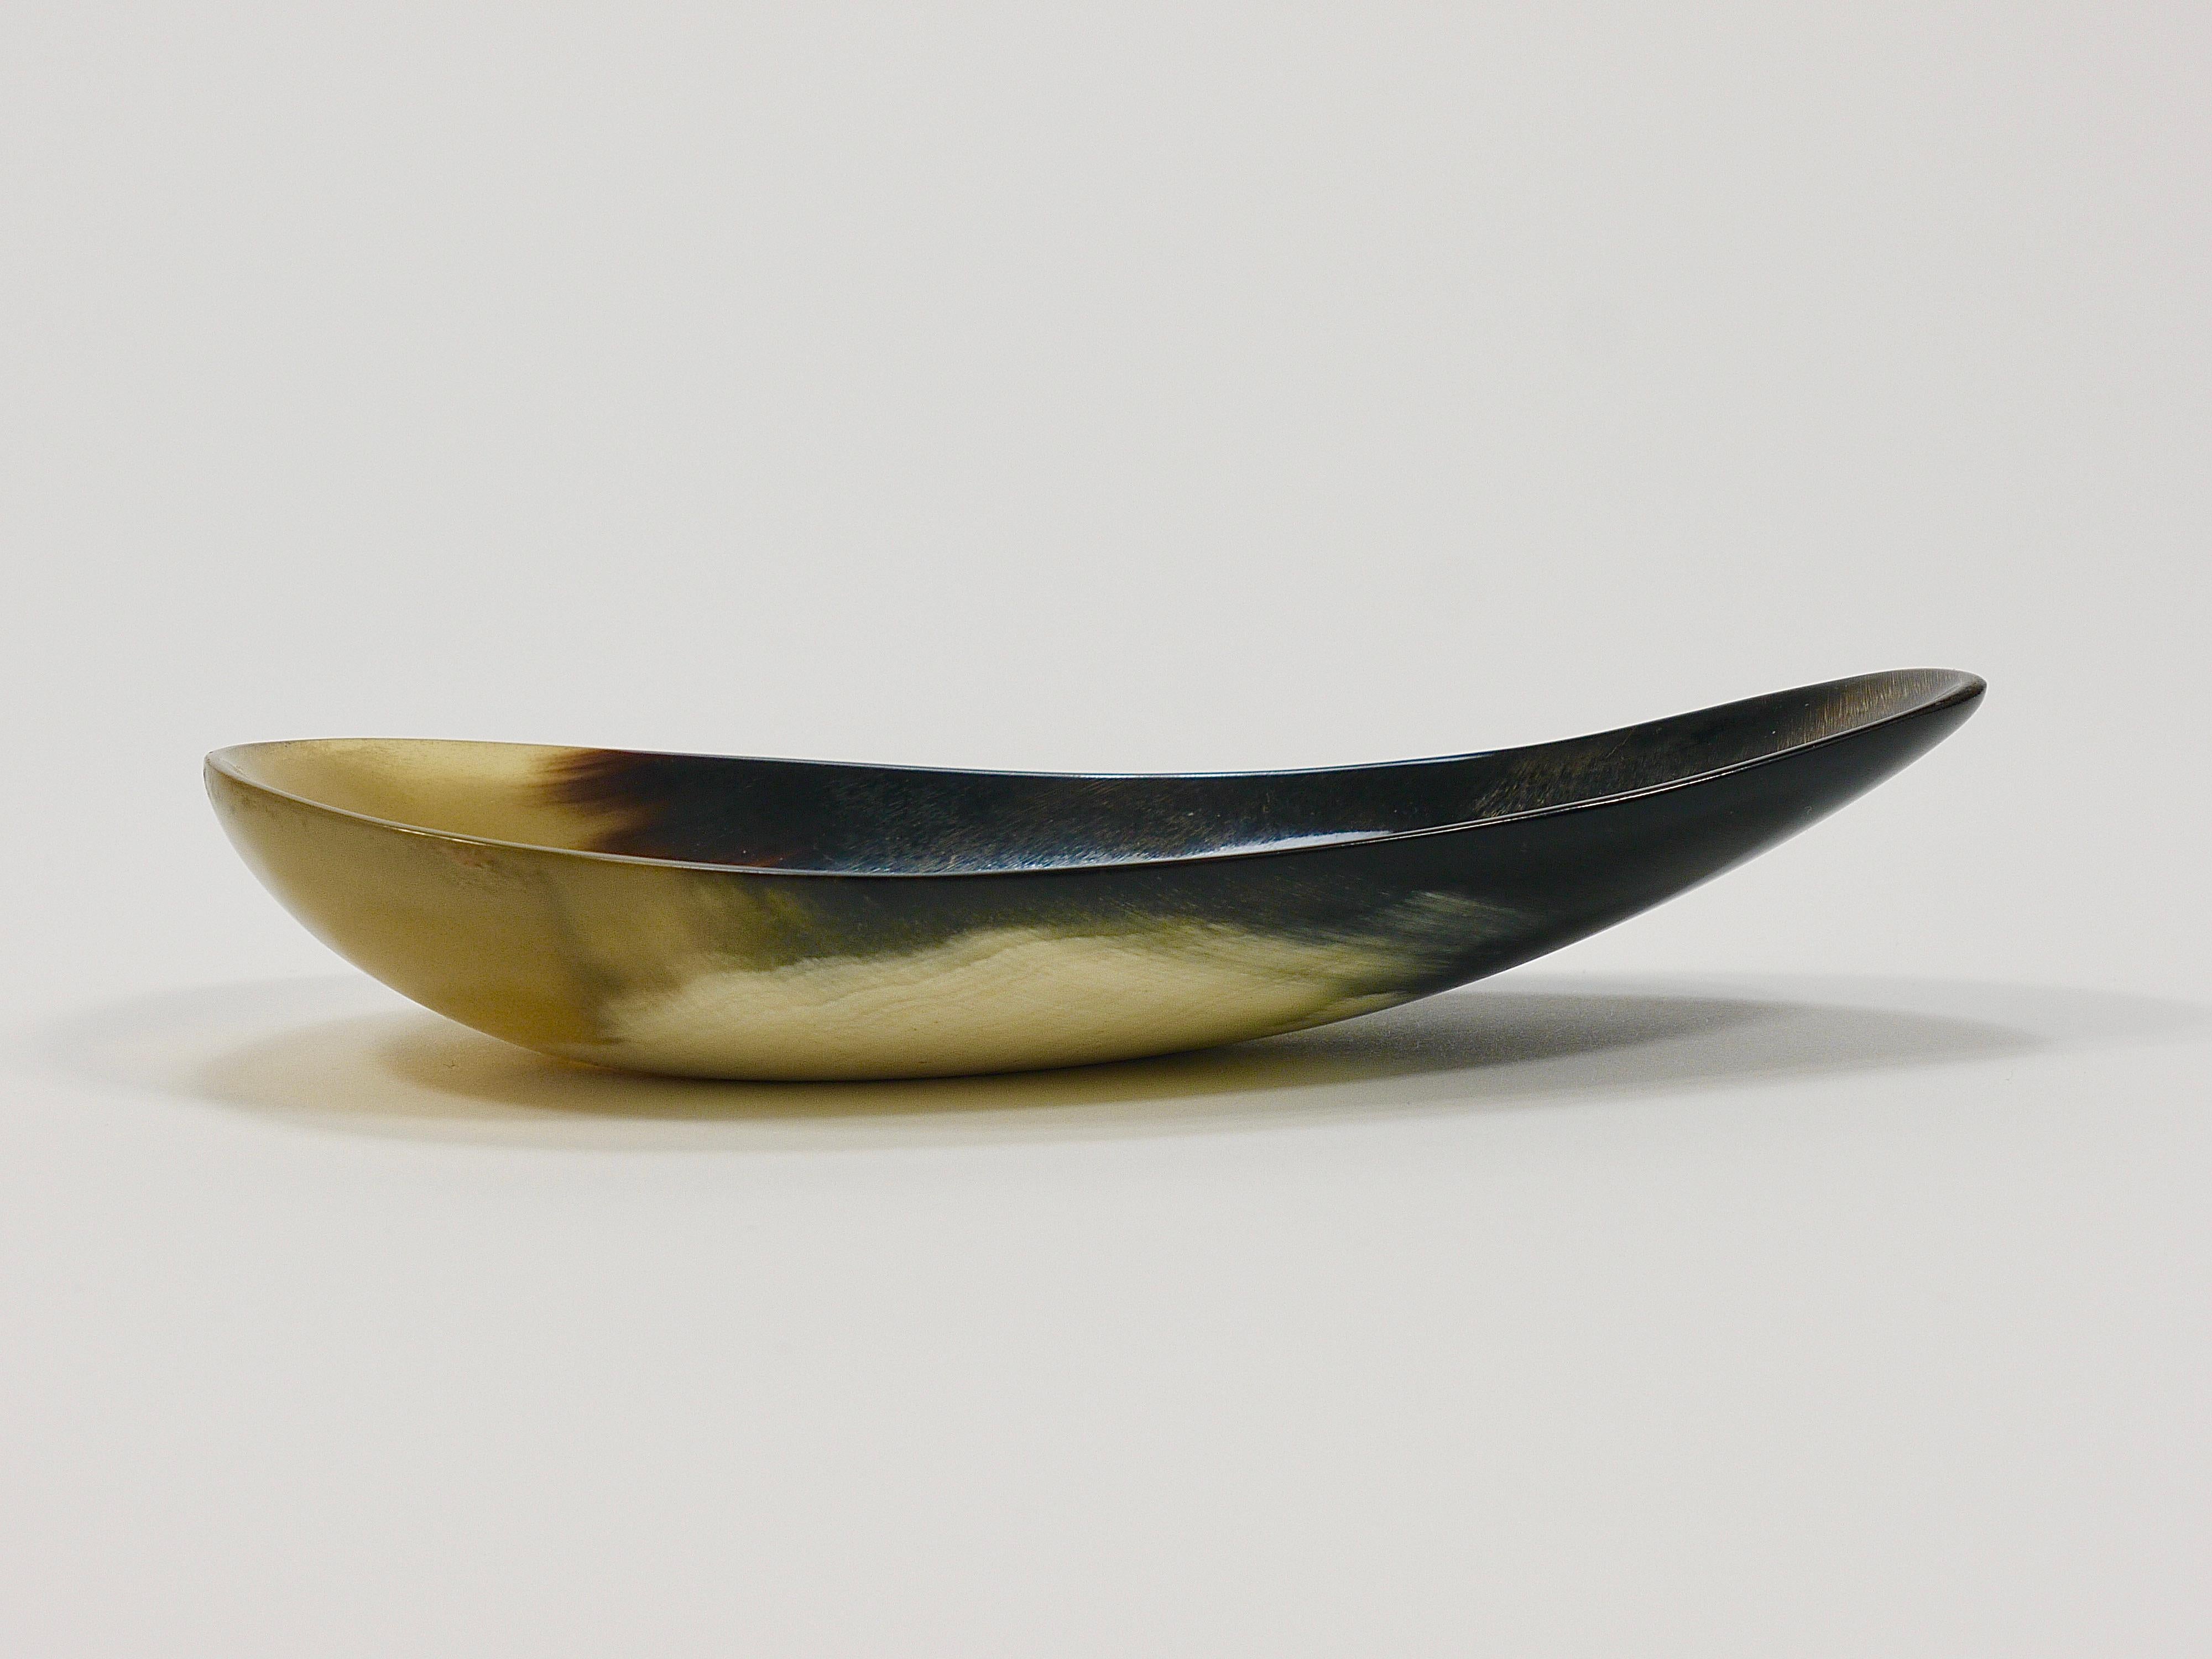 A beautiful and minimalistic mid-century modern bowl from the 1950s, shaped like a drop, made of cow horn. Designed and manufactured by Werkstätte Carl Auböck, Vienna, Austria. A very decorative piece that is versatile, for example, on a set table